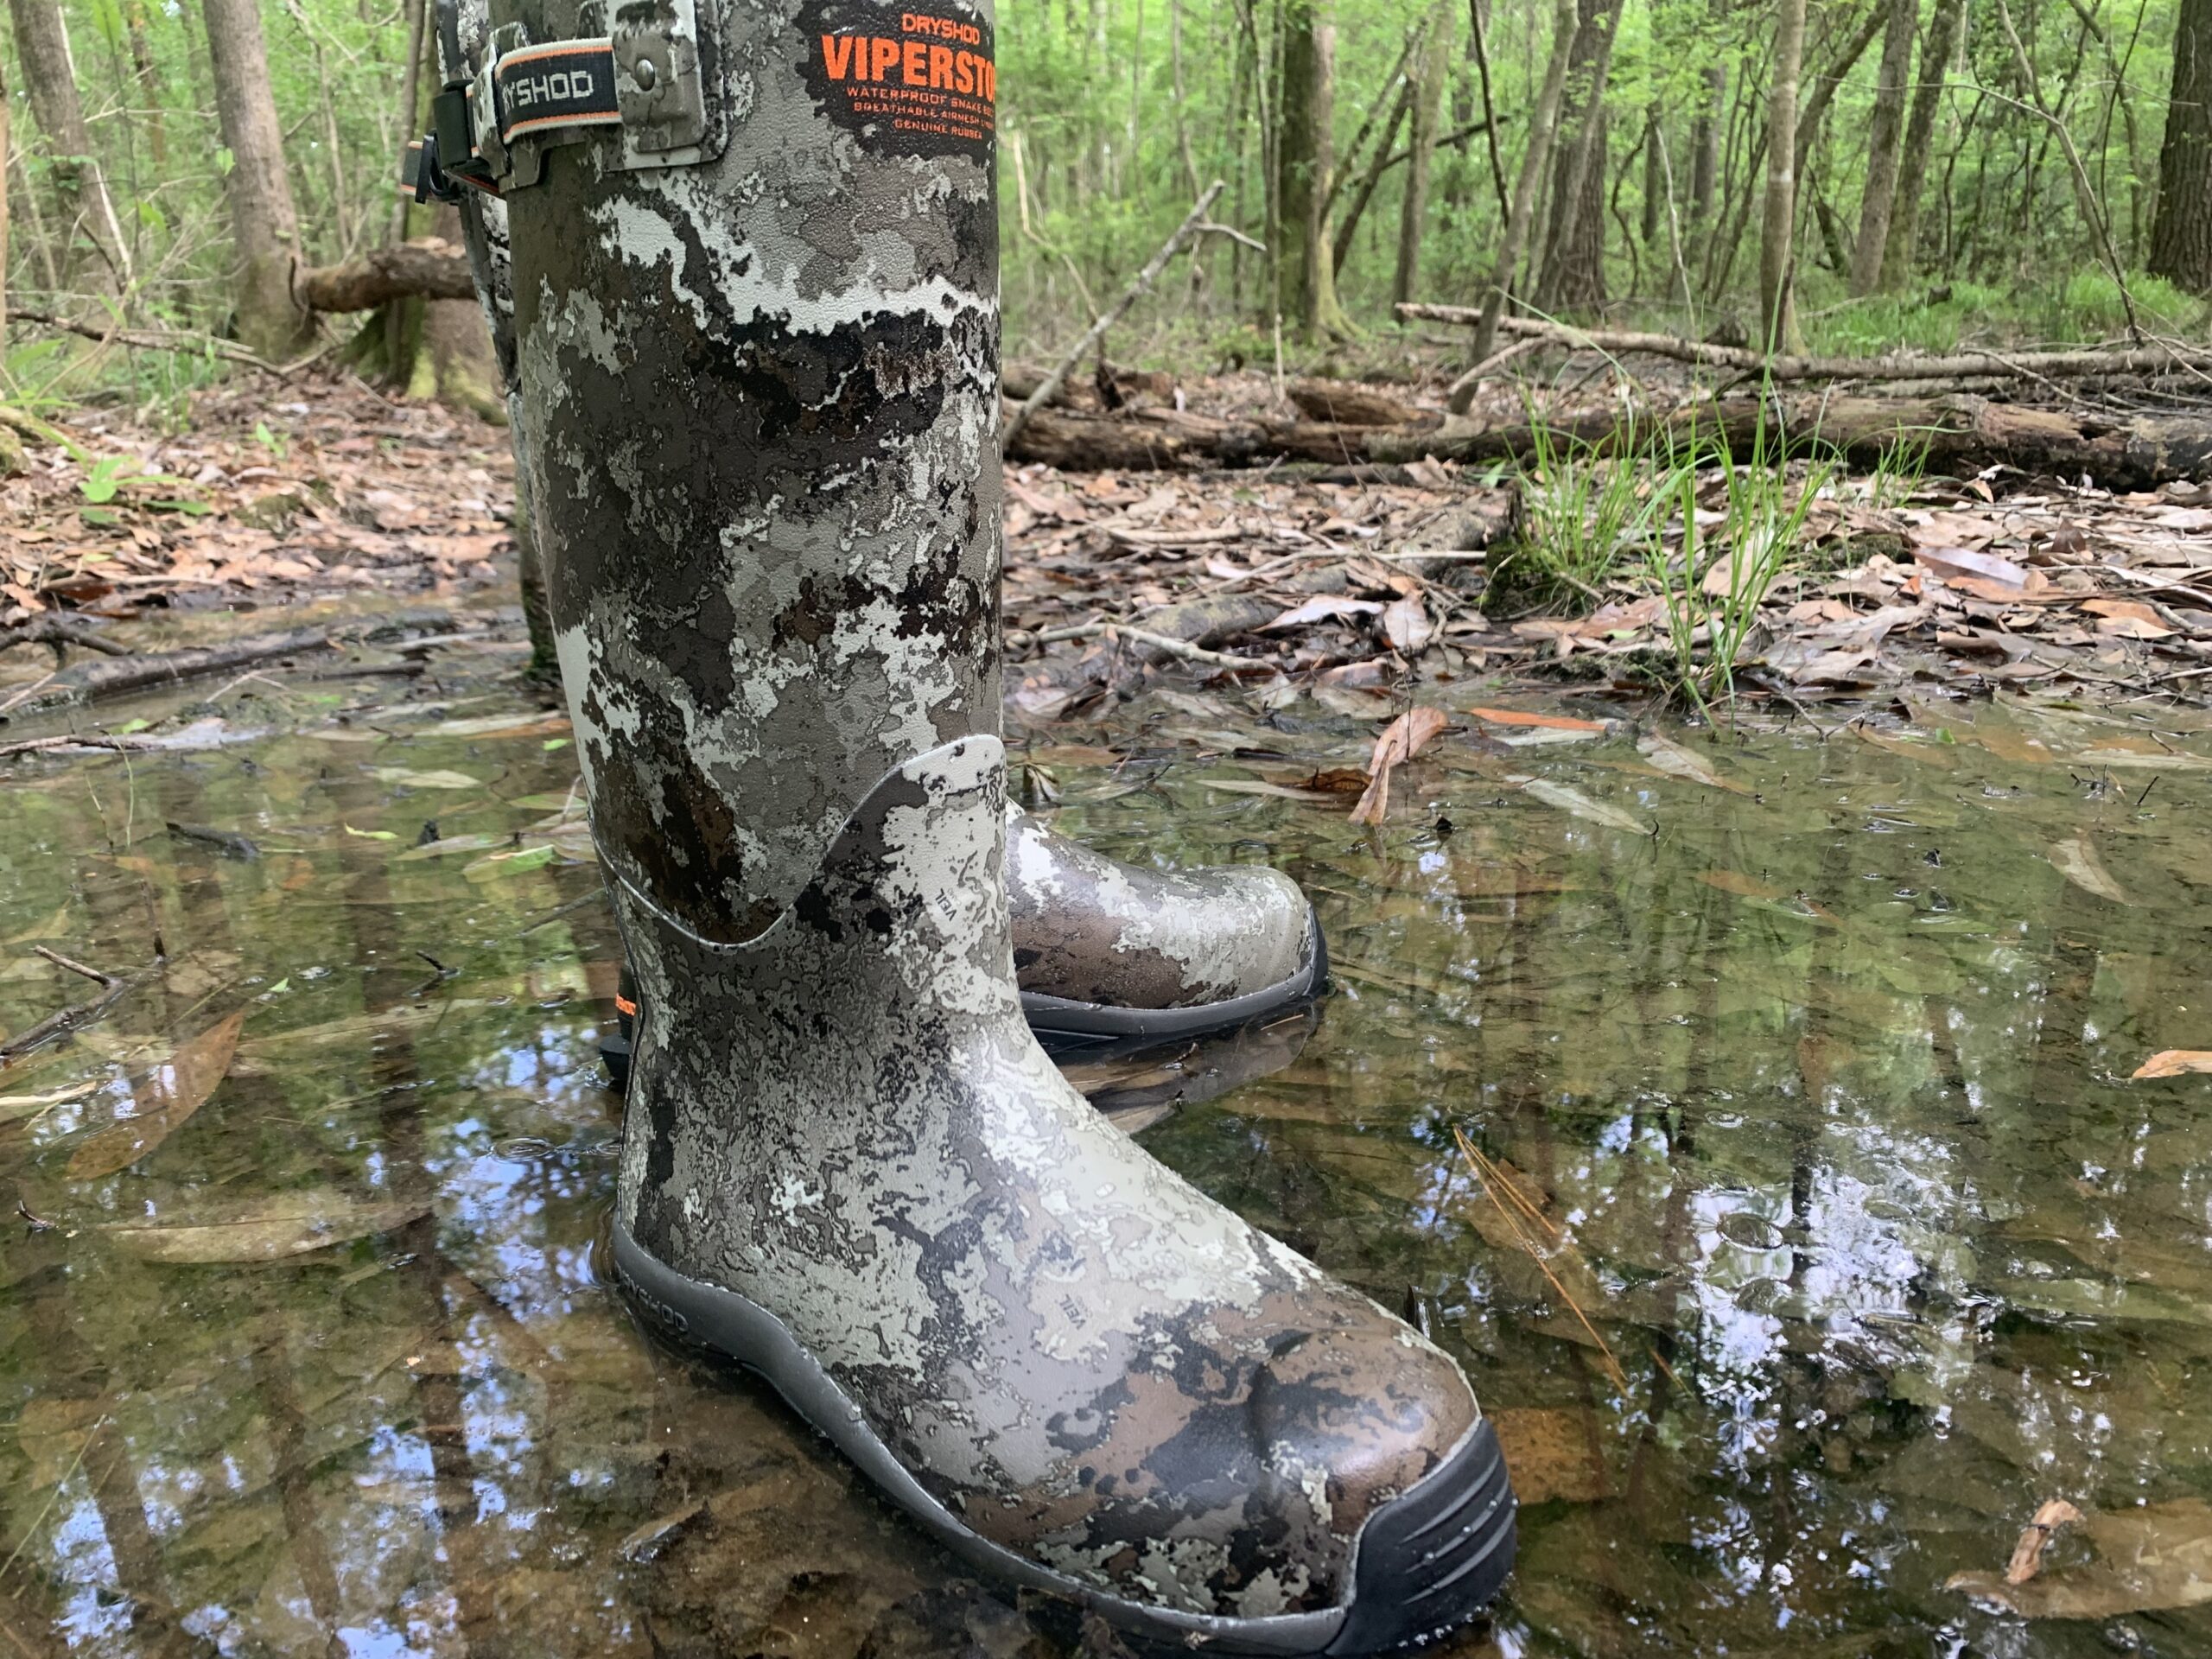 Best Rubber Hunting Boots of 2024